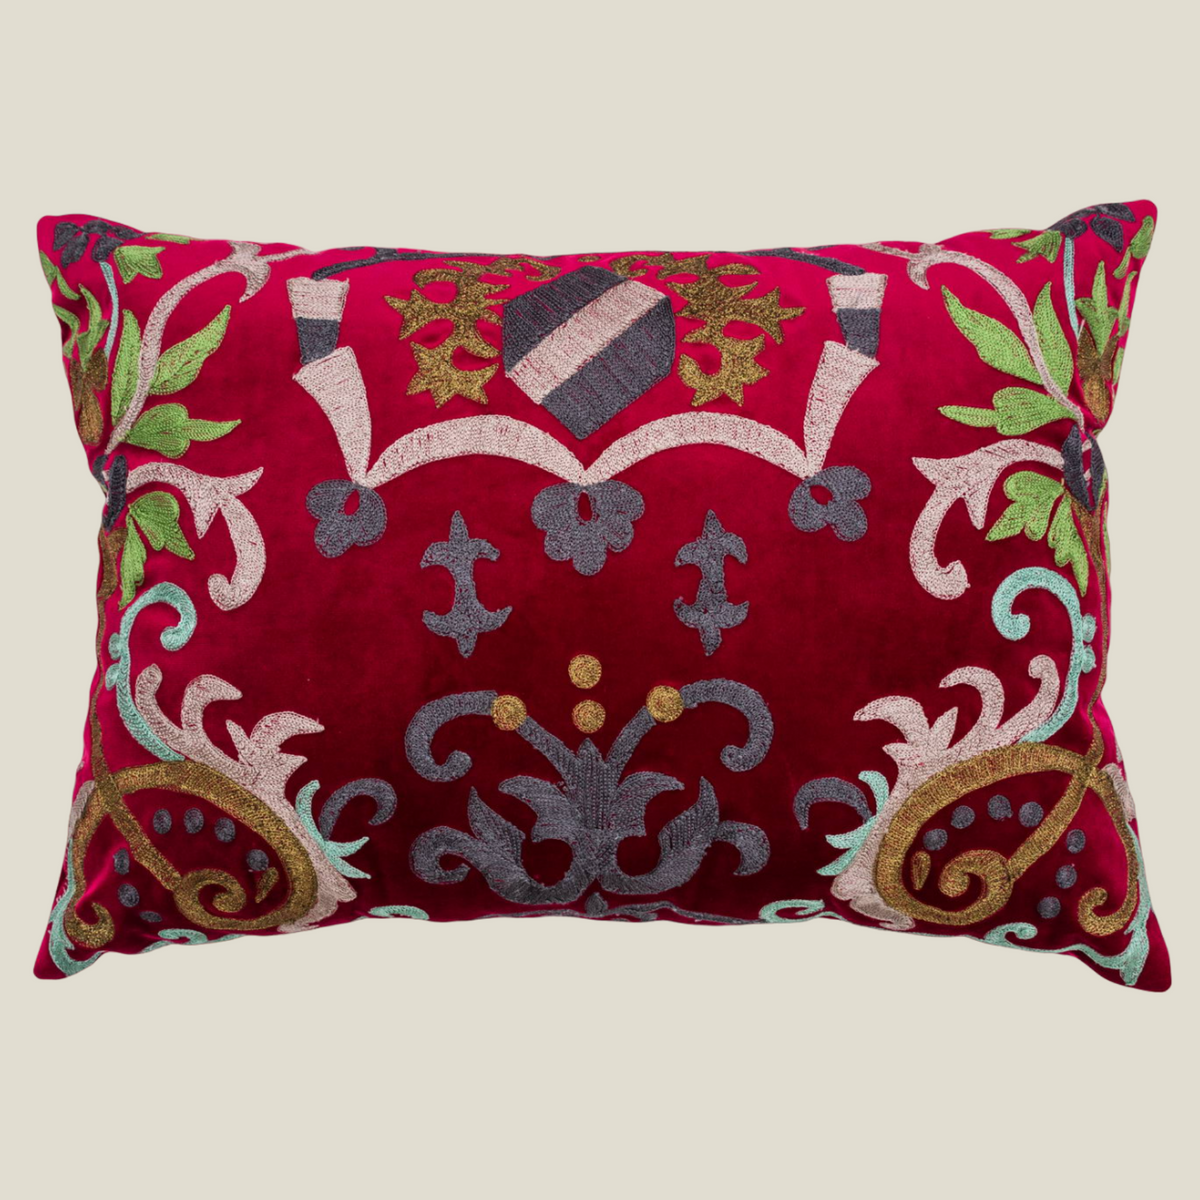 The Luxelife Maroon Velvet Floral Fully Embroidered Cushion Cover